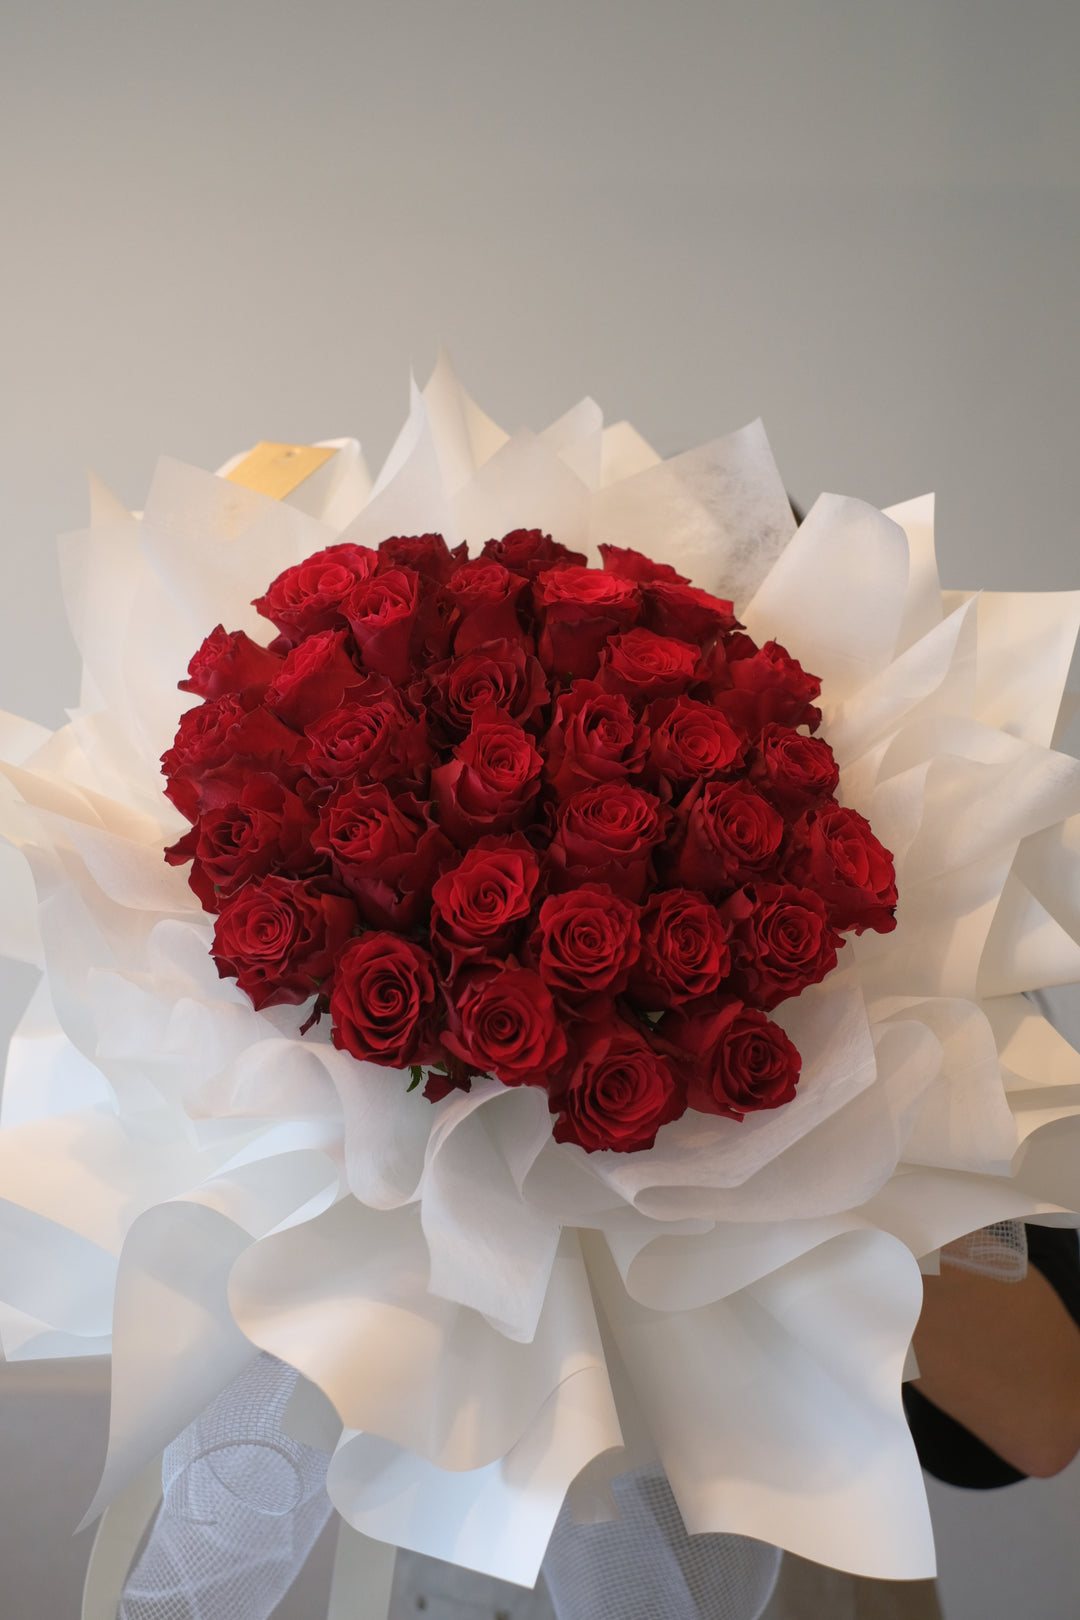 "Image of stunning red roses elegantly presented in white wraps, ideal for creating a showstopping display for your special occasions."